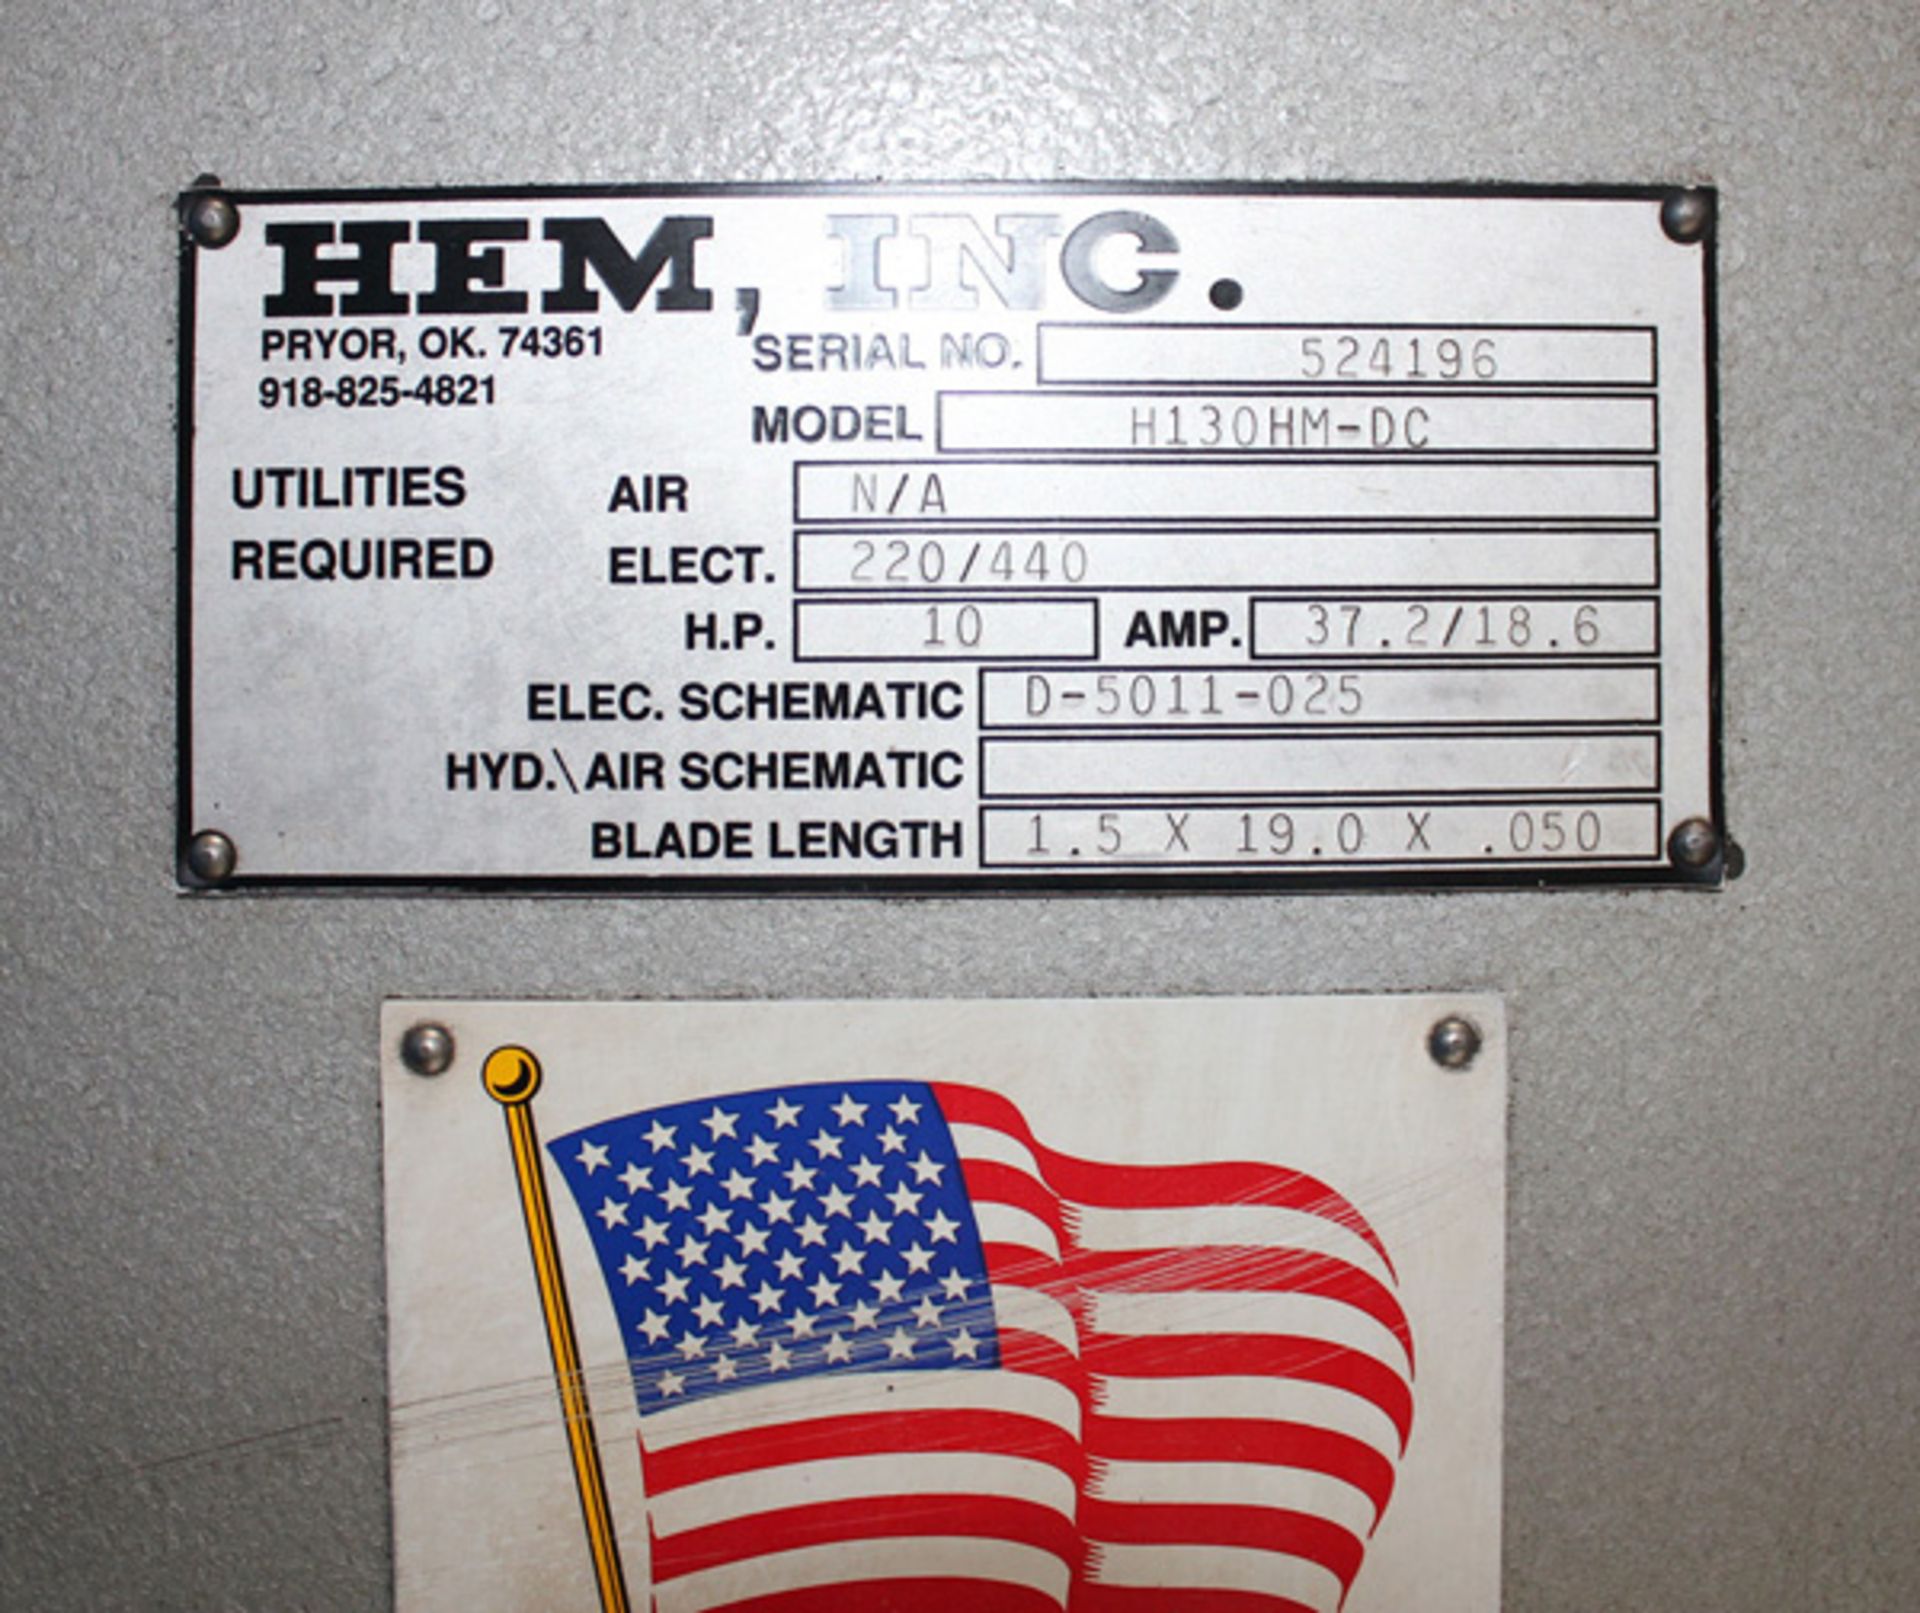 1996 HEM Semi-Automatic Horizontal Bandsaw, 18" x 20", Mdl: H130 HM- DC, S/N: 524196, Located In: - Image 8 of 8